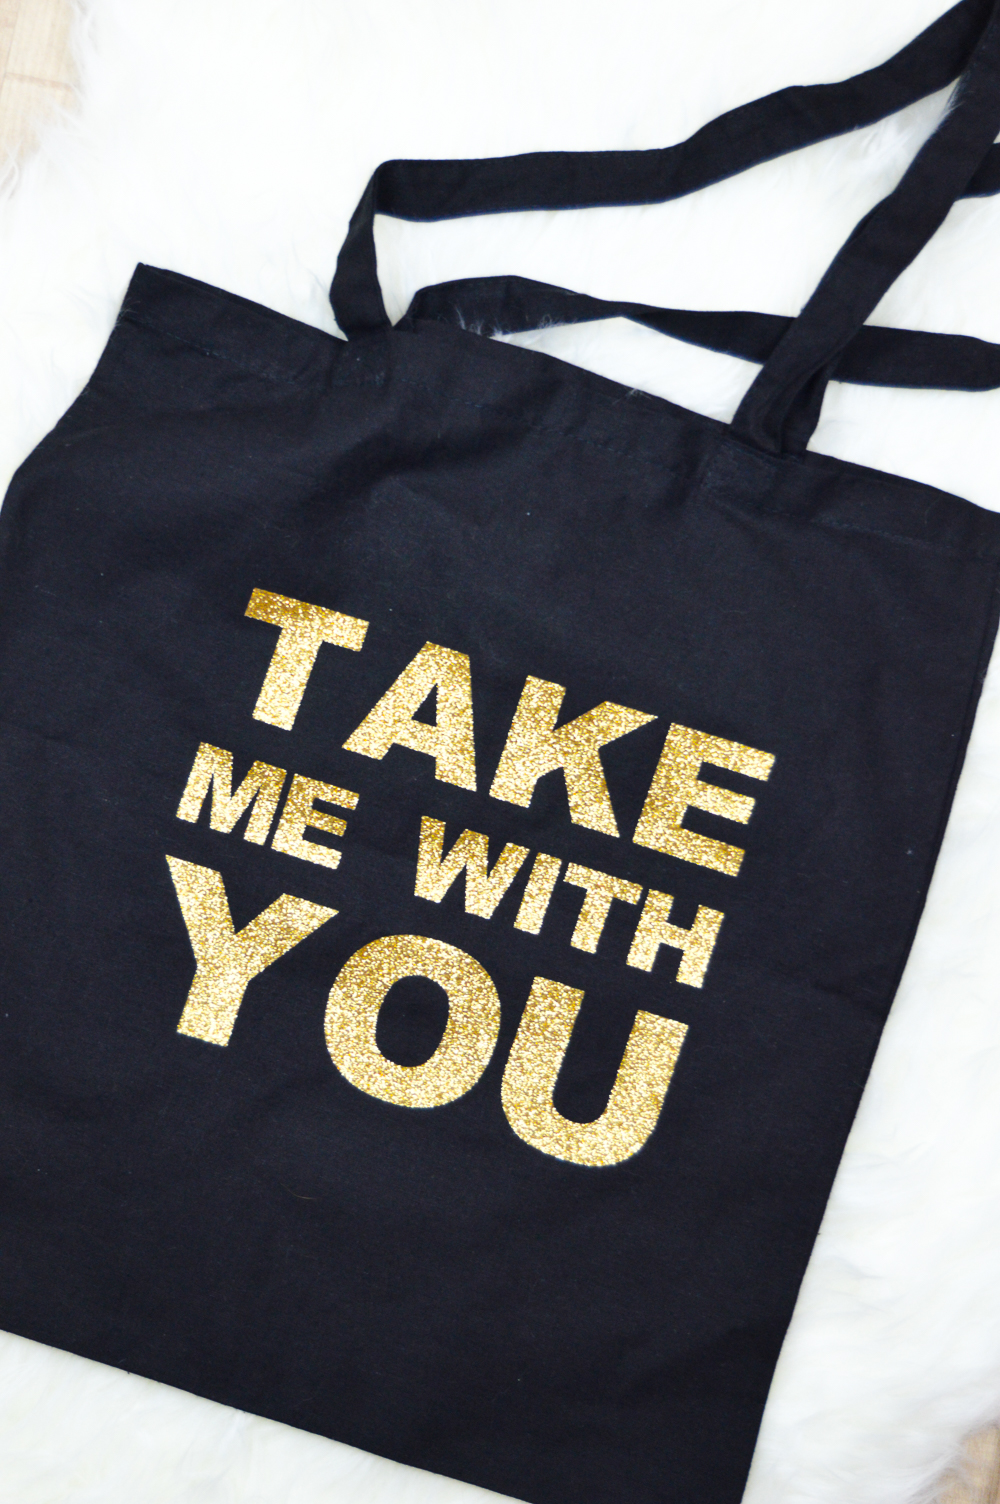 DIY Glittery Graphic Tote Bag | www.clubcrafted.com